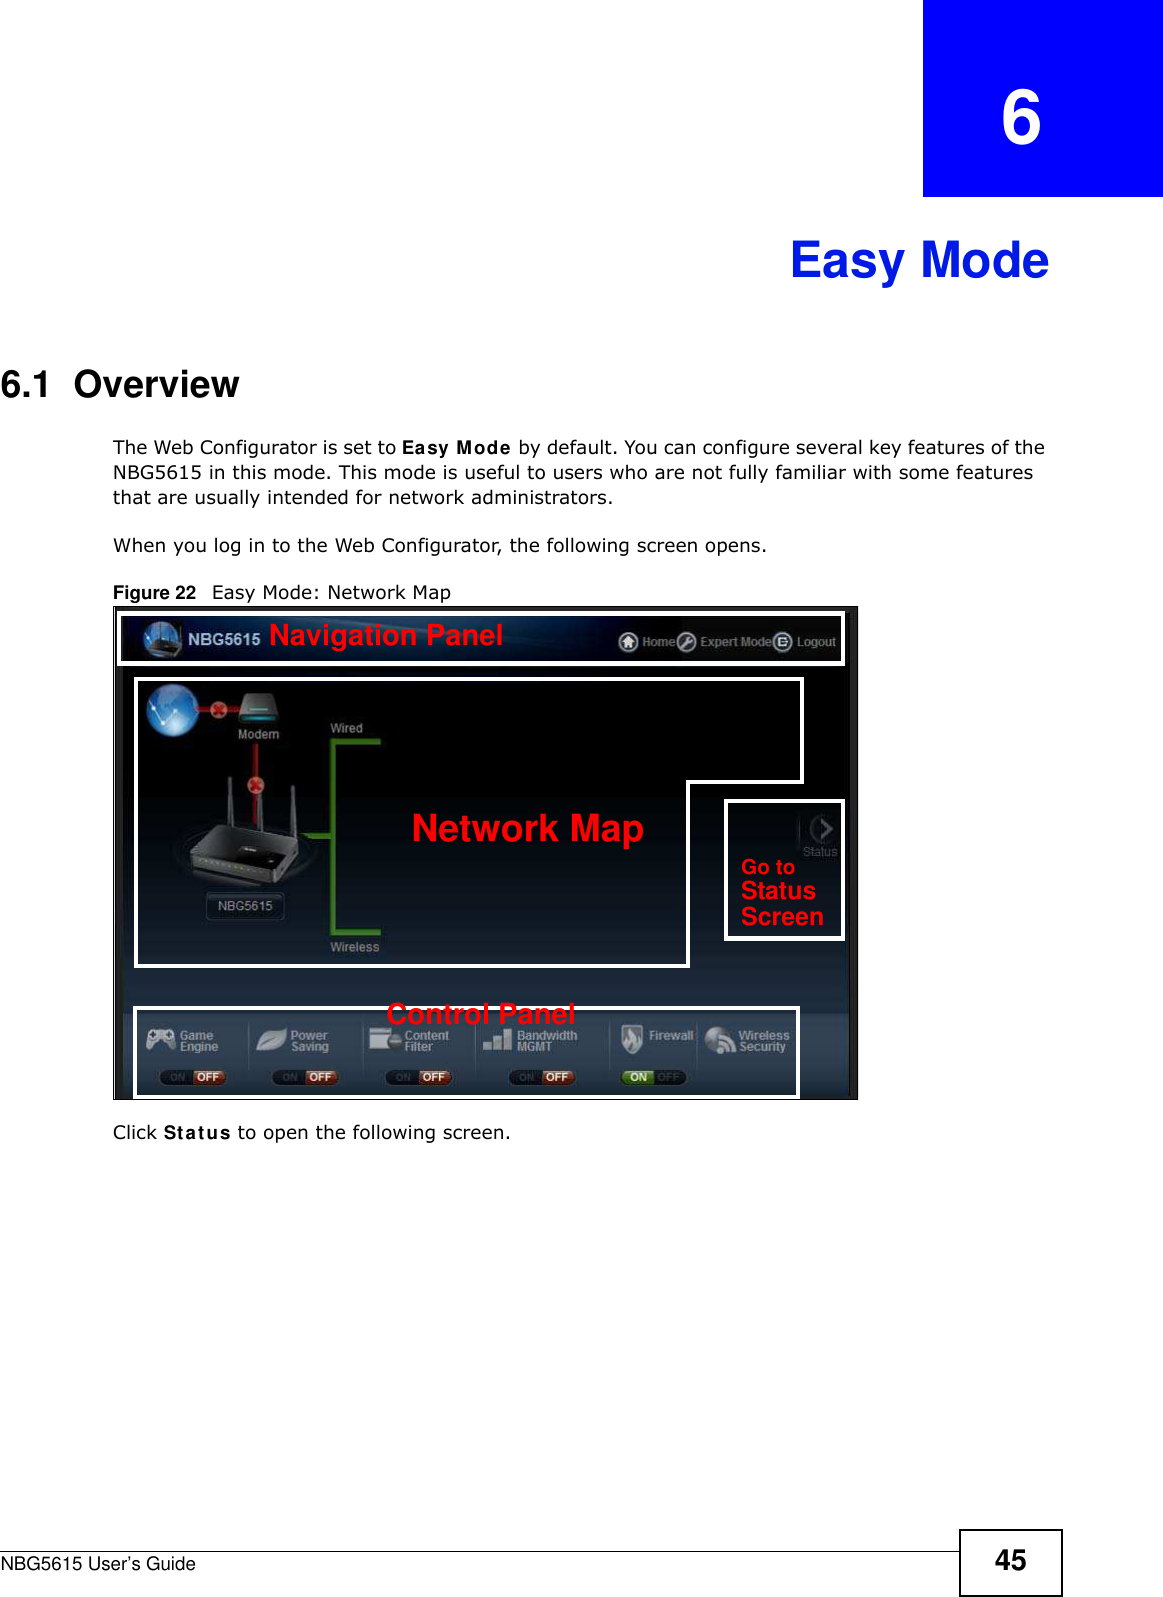 NBG5615 User’s Guide 45CHAPTER   6Easy Mode6.1  OverviewThe Web Configurator is set to Easy Mode by default. You can configure several key features of the NBG5615 in this mode. This mode is useful to users who are not fully familiar with some features that are usually intended for network administrators.When you log in to the Web Configurator, the following screen opens.Figure 22   Easy Mode: Network Map Click Status to open the following screen.Network MapControl PanelGo toStatusScreenNavigation Panel